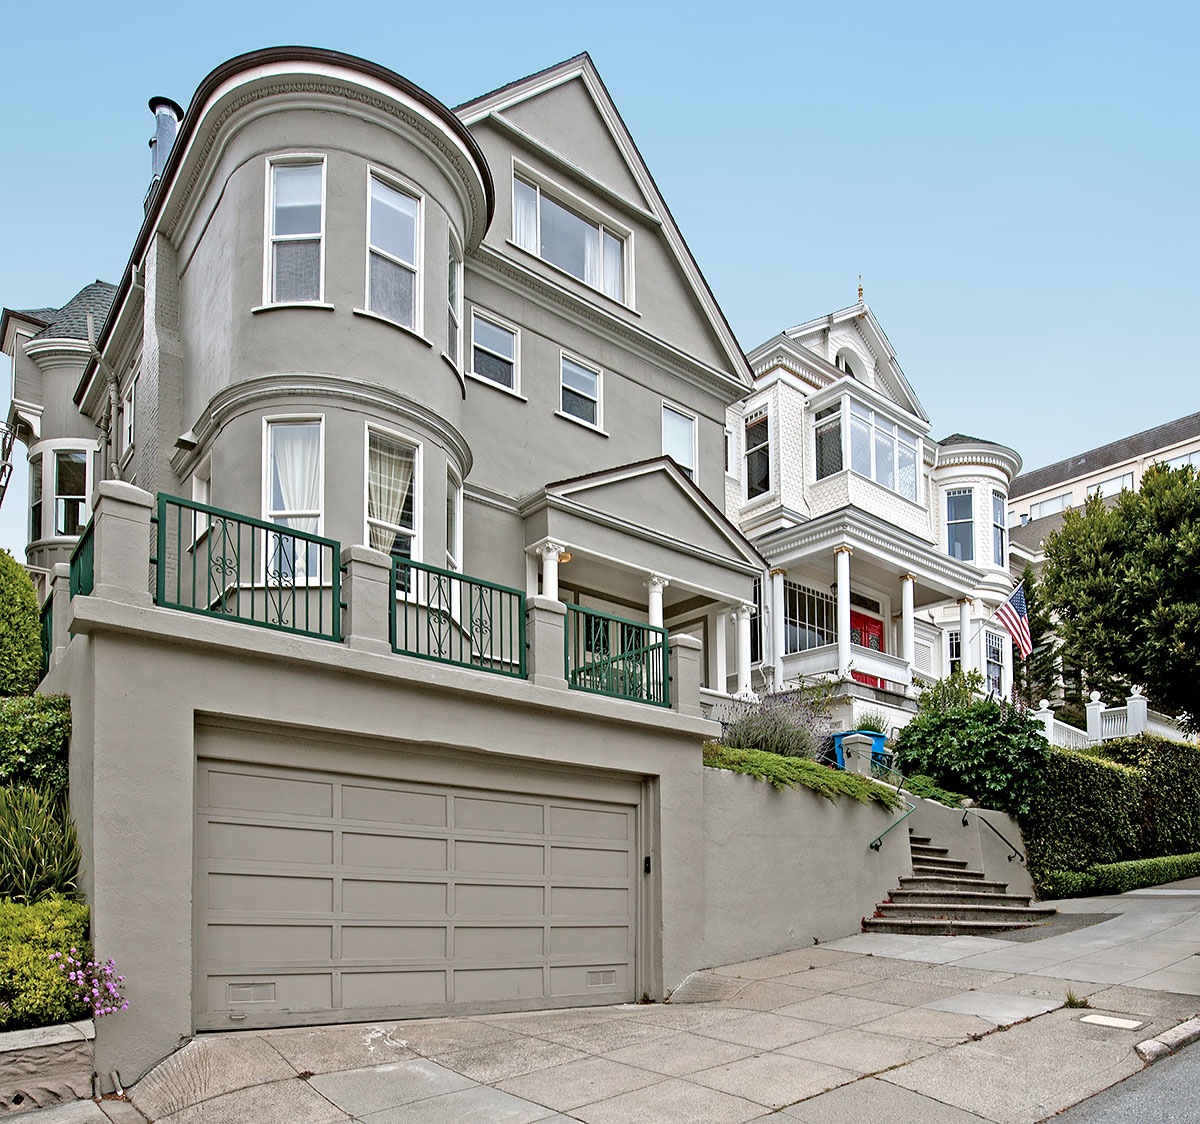 2218 Clay Street in Pacific Heights was designed by Newsom & Newsom and built in 1891.